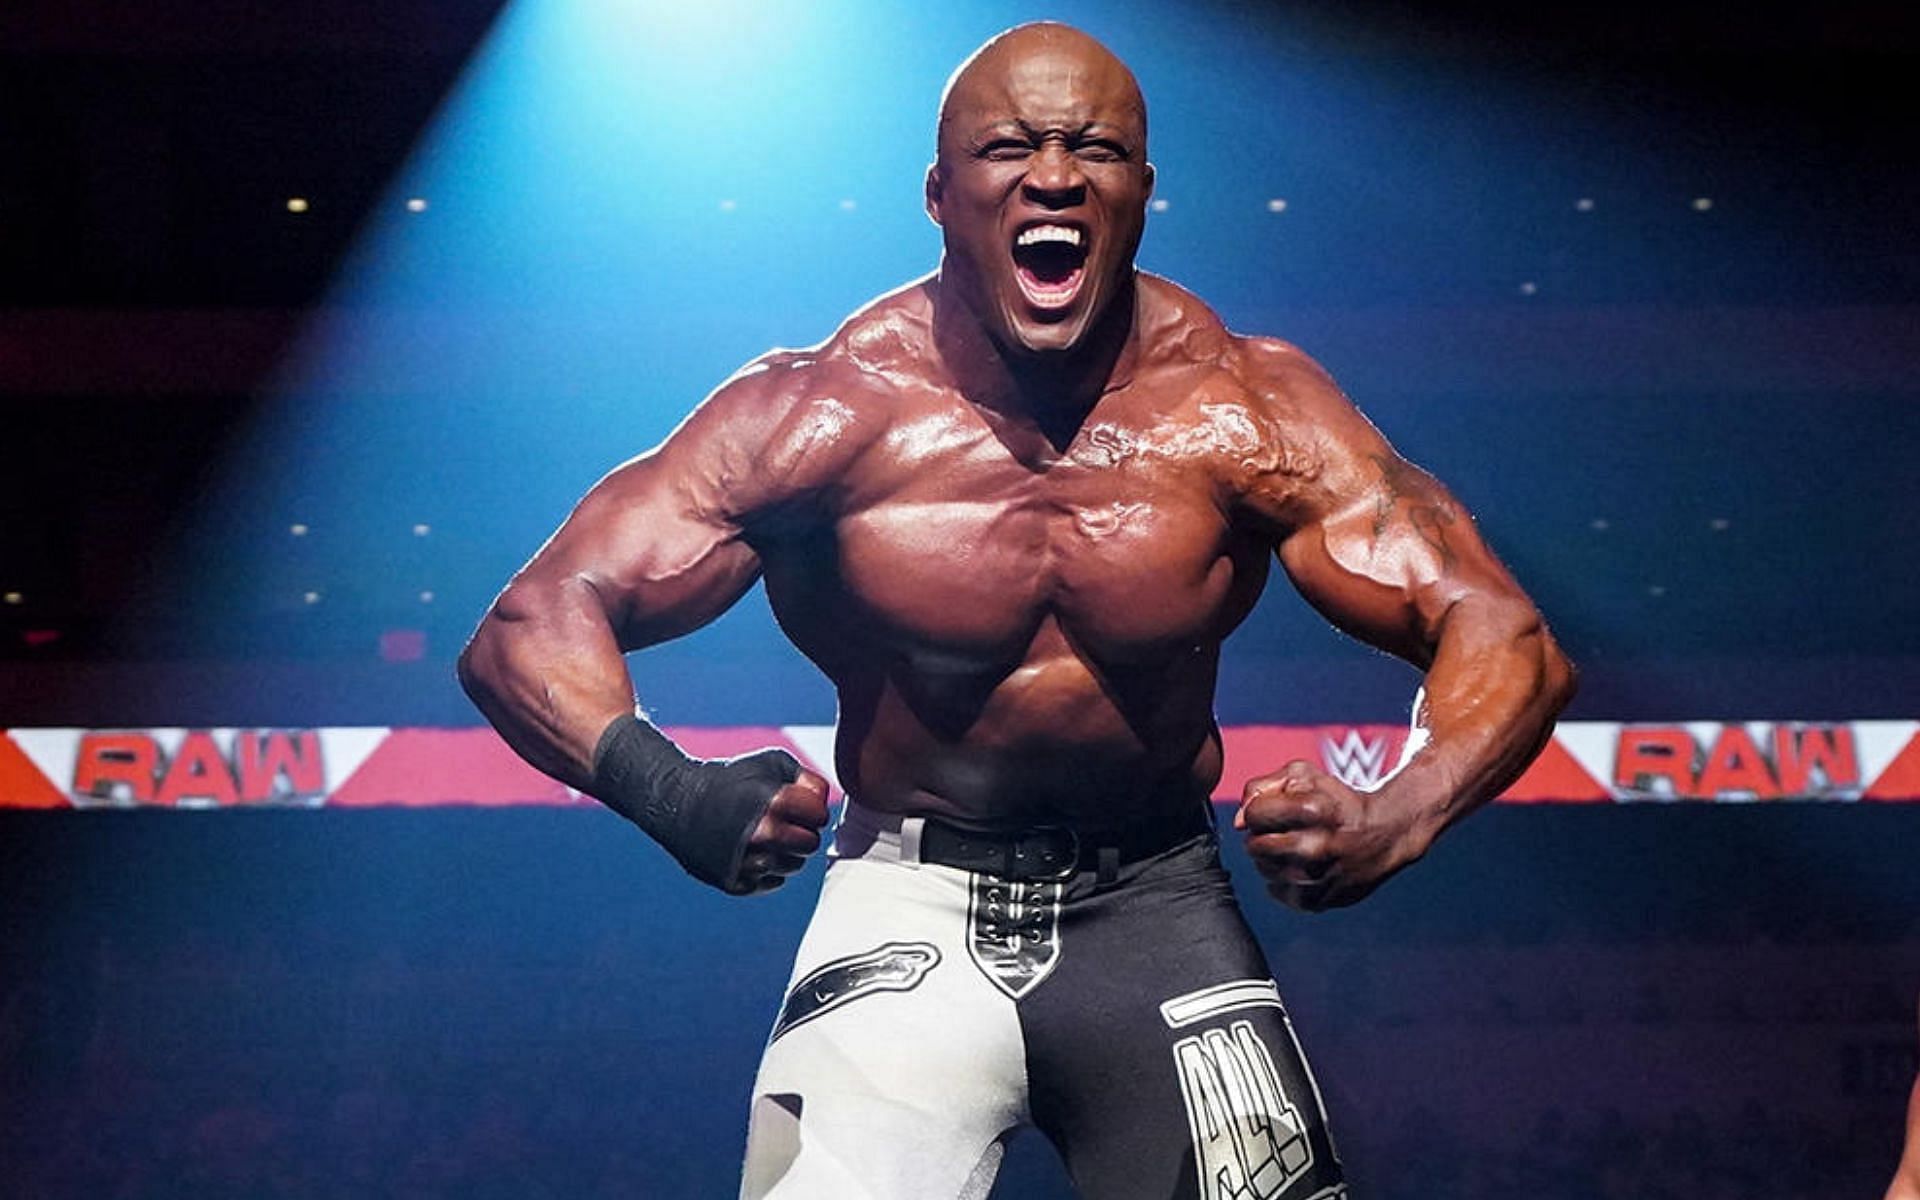 Lashley has been one of the top stars in WWE over the last few years.